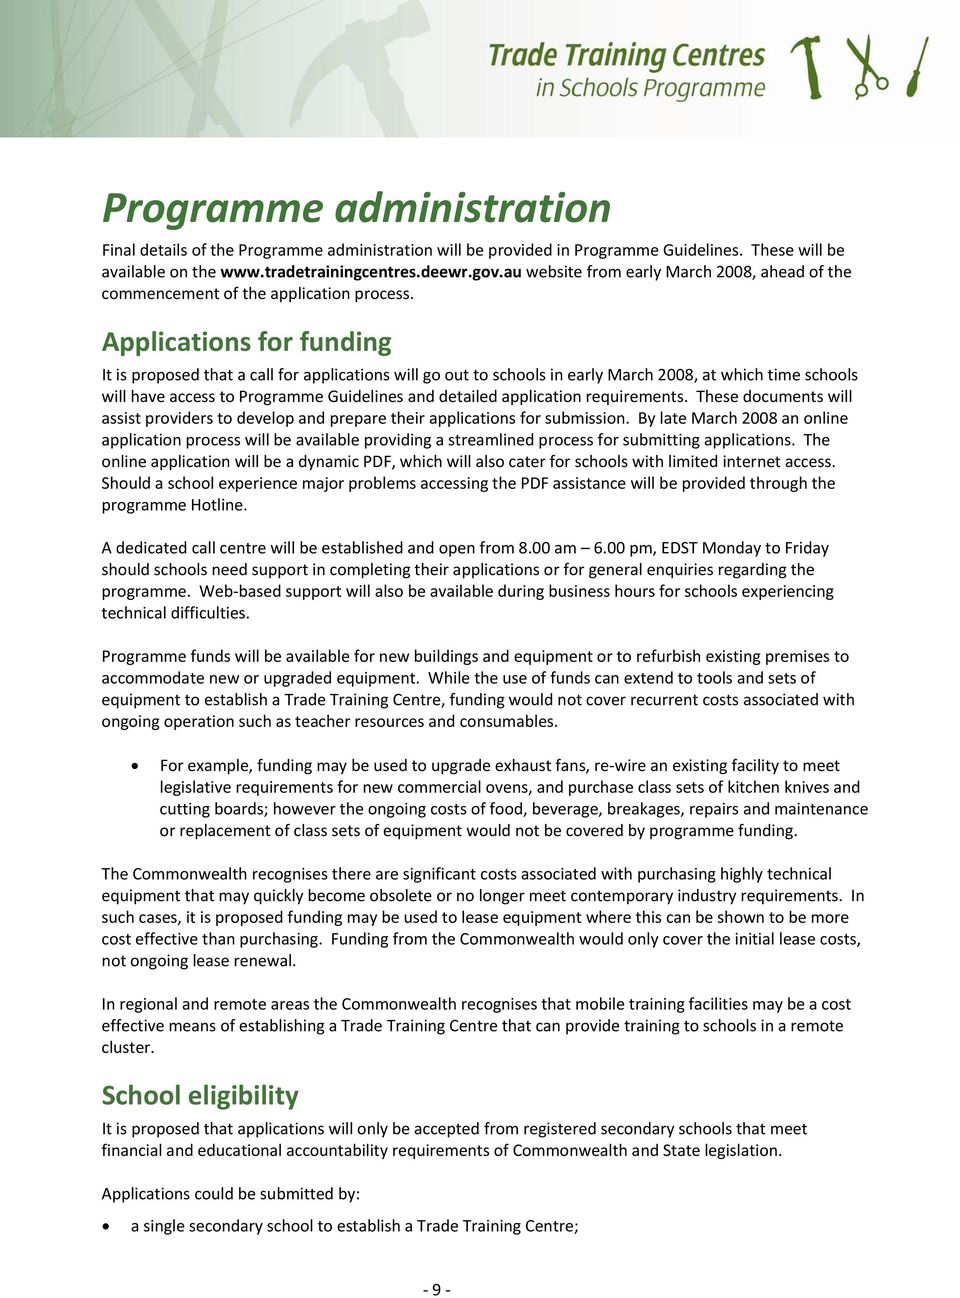 Applications for funding It is proposed that a call for applications will go out to schools in early March 2008, at which time schools will have access to Programme Guidelines and detailed